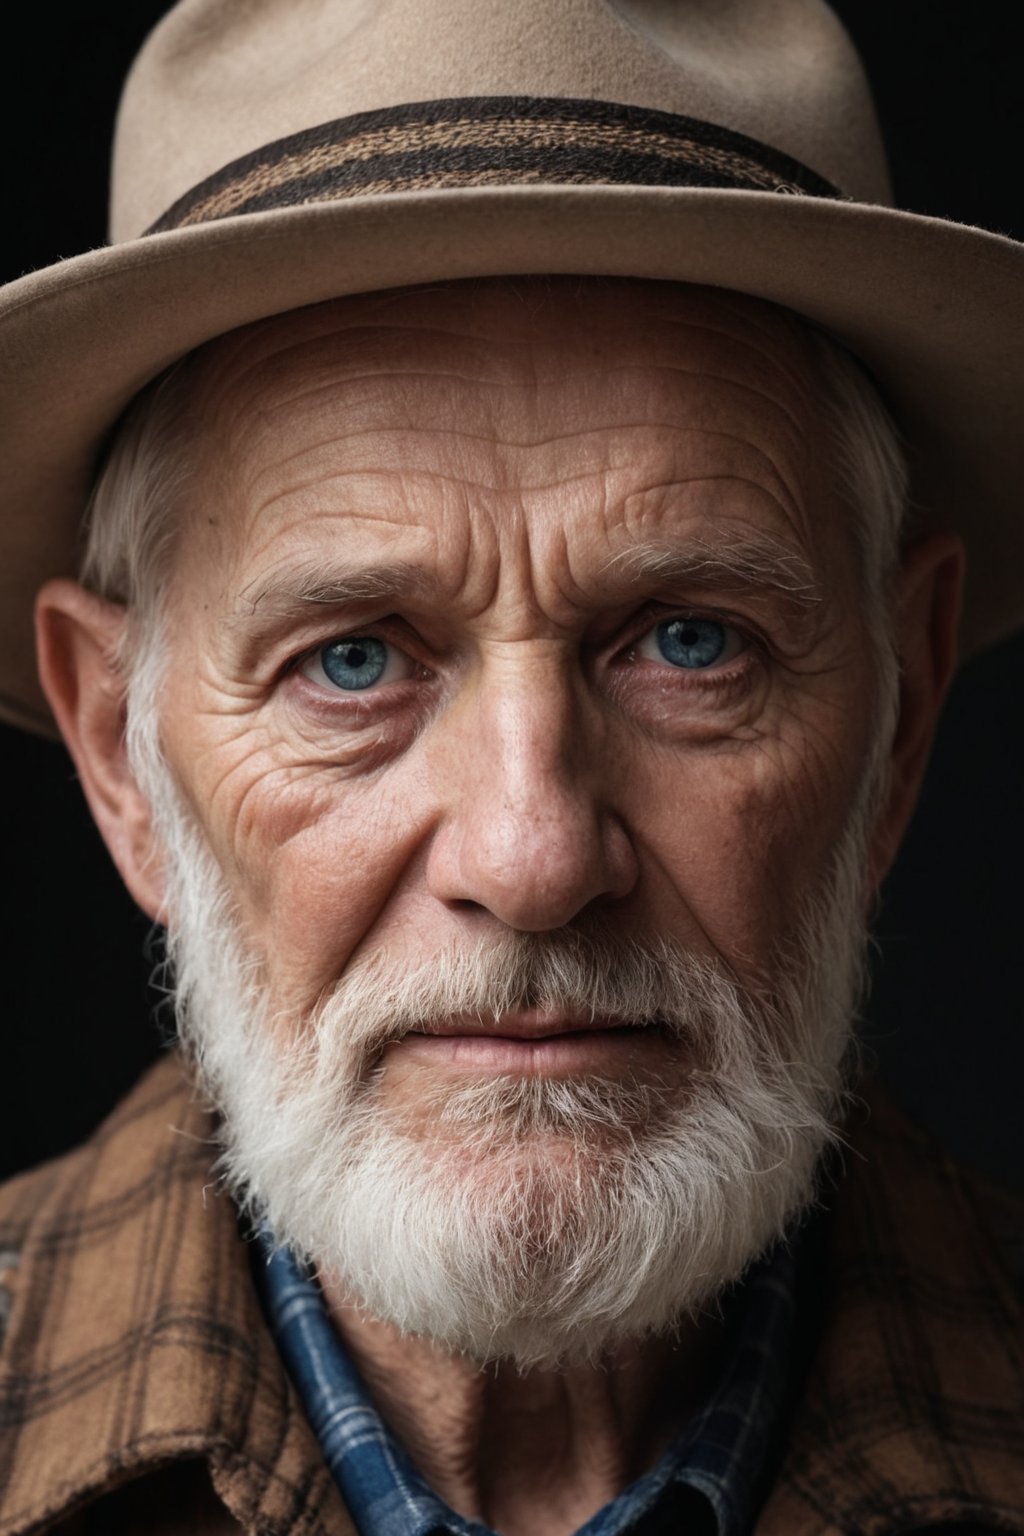 Hyperrealistic fine art photography, film photography aesthetic, dark background emphasizing facial features, intense close-up portrait of an elderly man with piercing blue eyes, weathered skin, pronounced wrinkles, white full beard, stern expression, wearing a brown felt hat and plaid shirt with visible collar, natural lighting accentuating skin texture, high contrast and sharp detail, emphasis on character and emotion, vibrant, whimsical